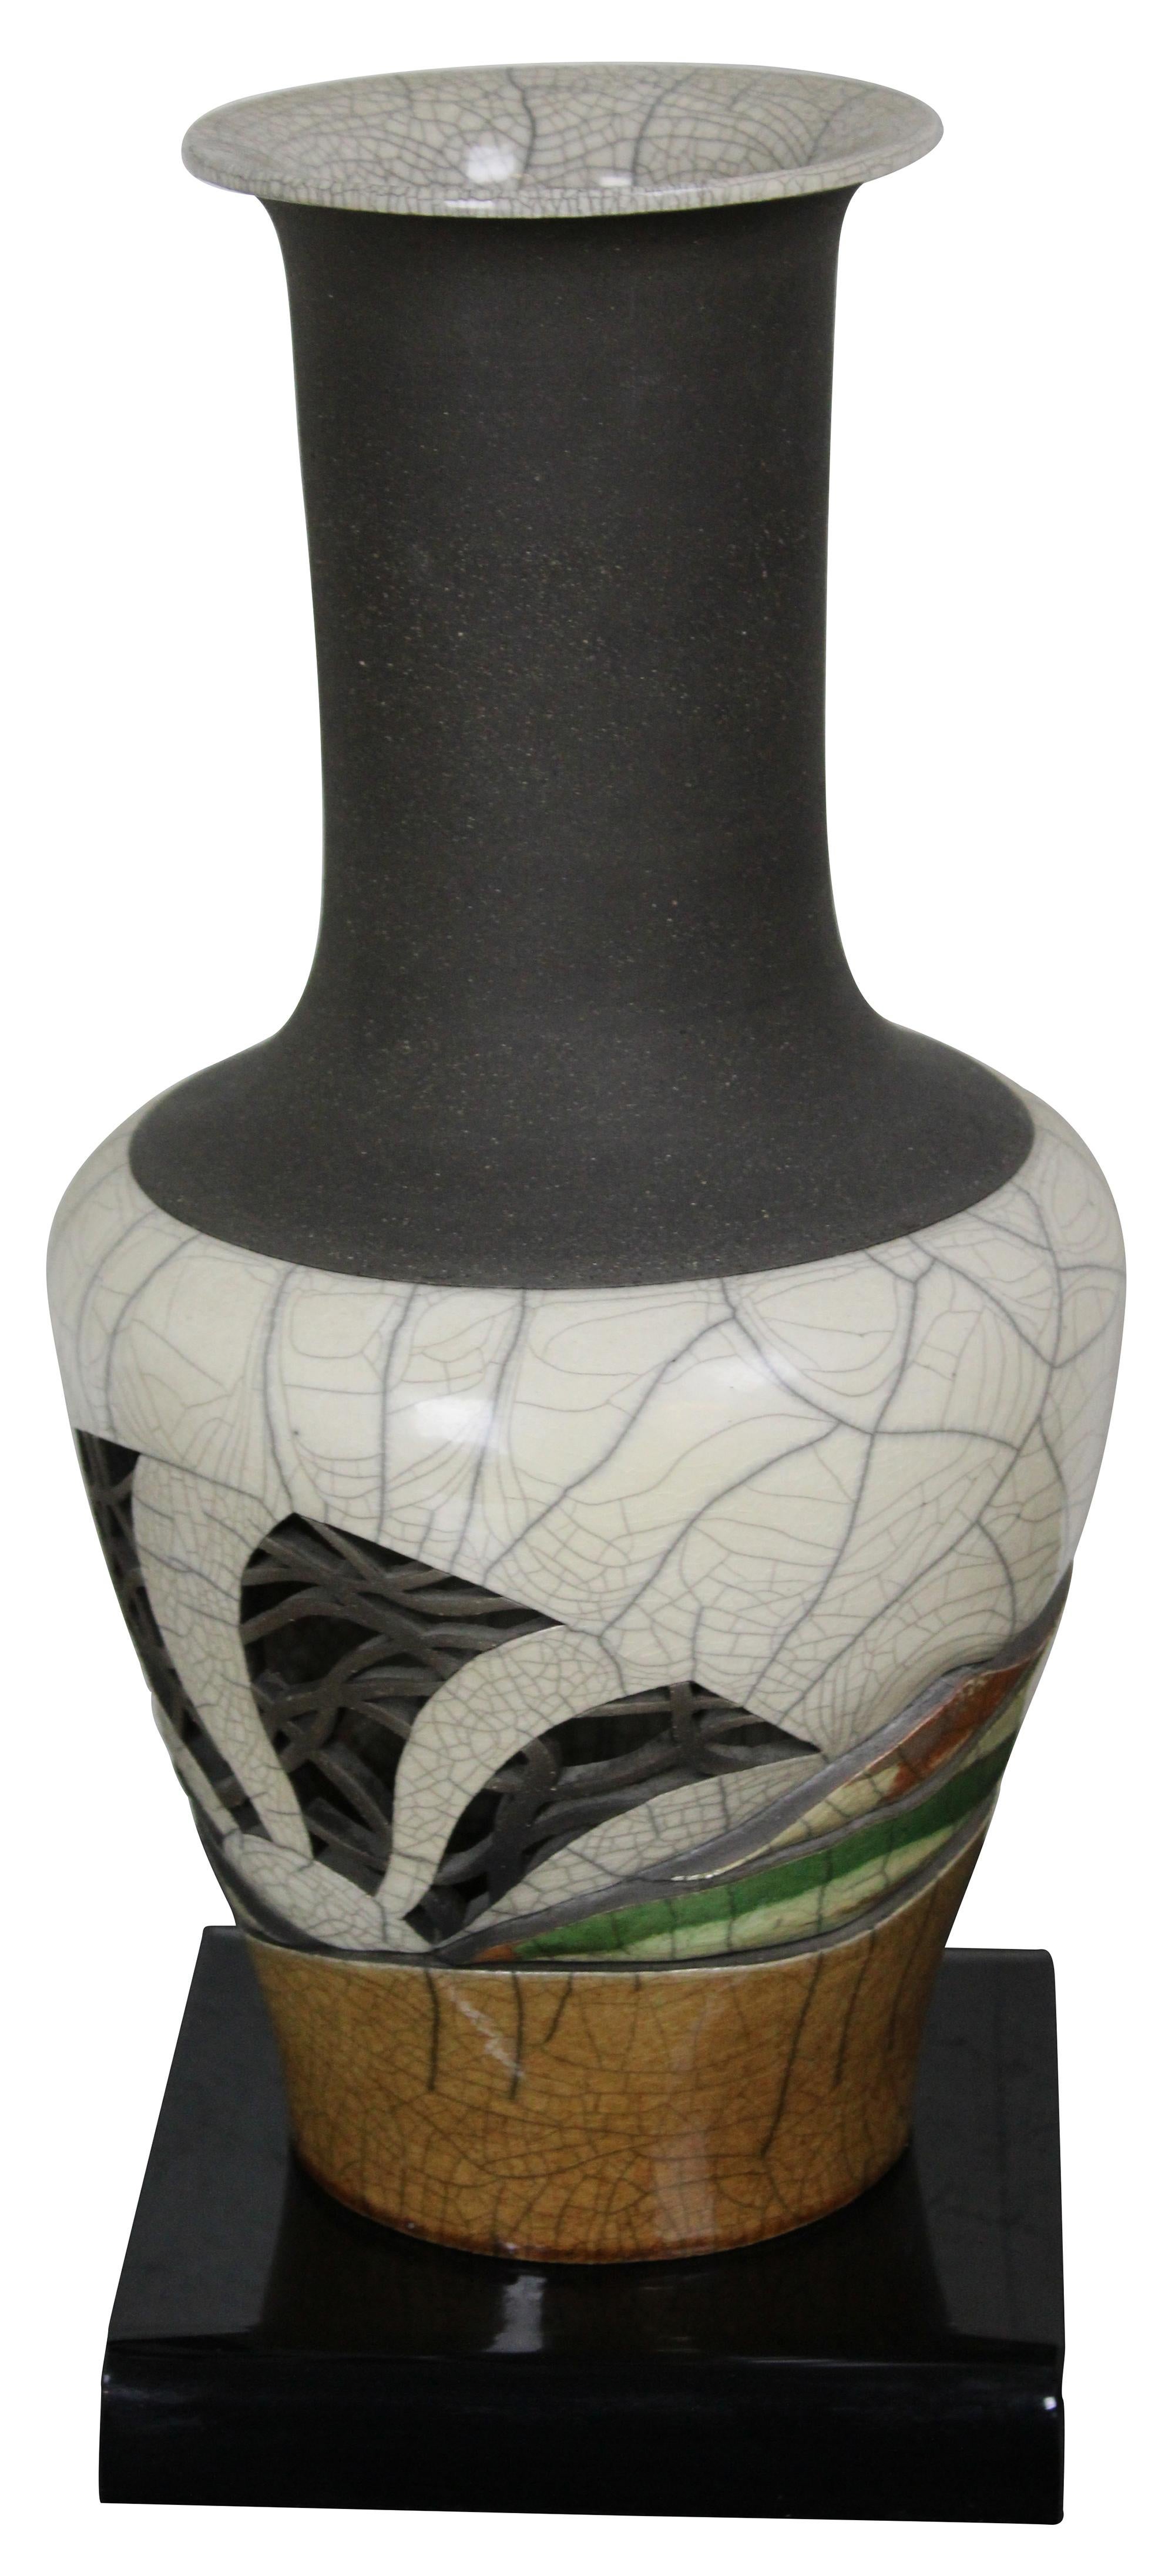 Chinoiserie 1981 Bill Herb Dimensional Raku Pottery Mantel Vase Modern Abstract Reticulated